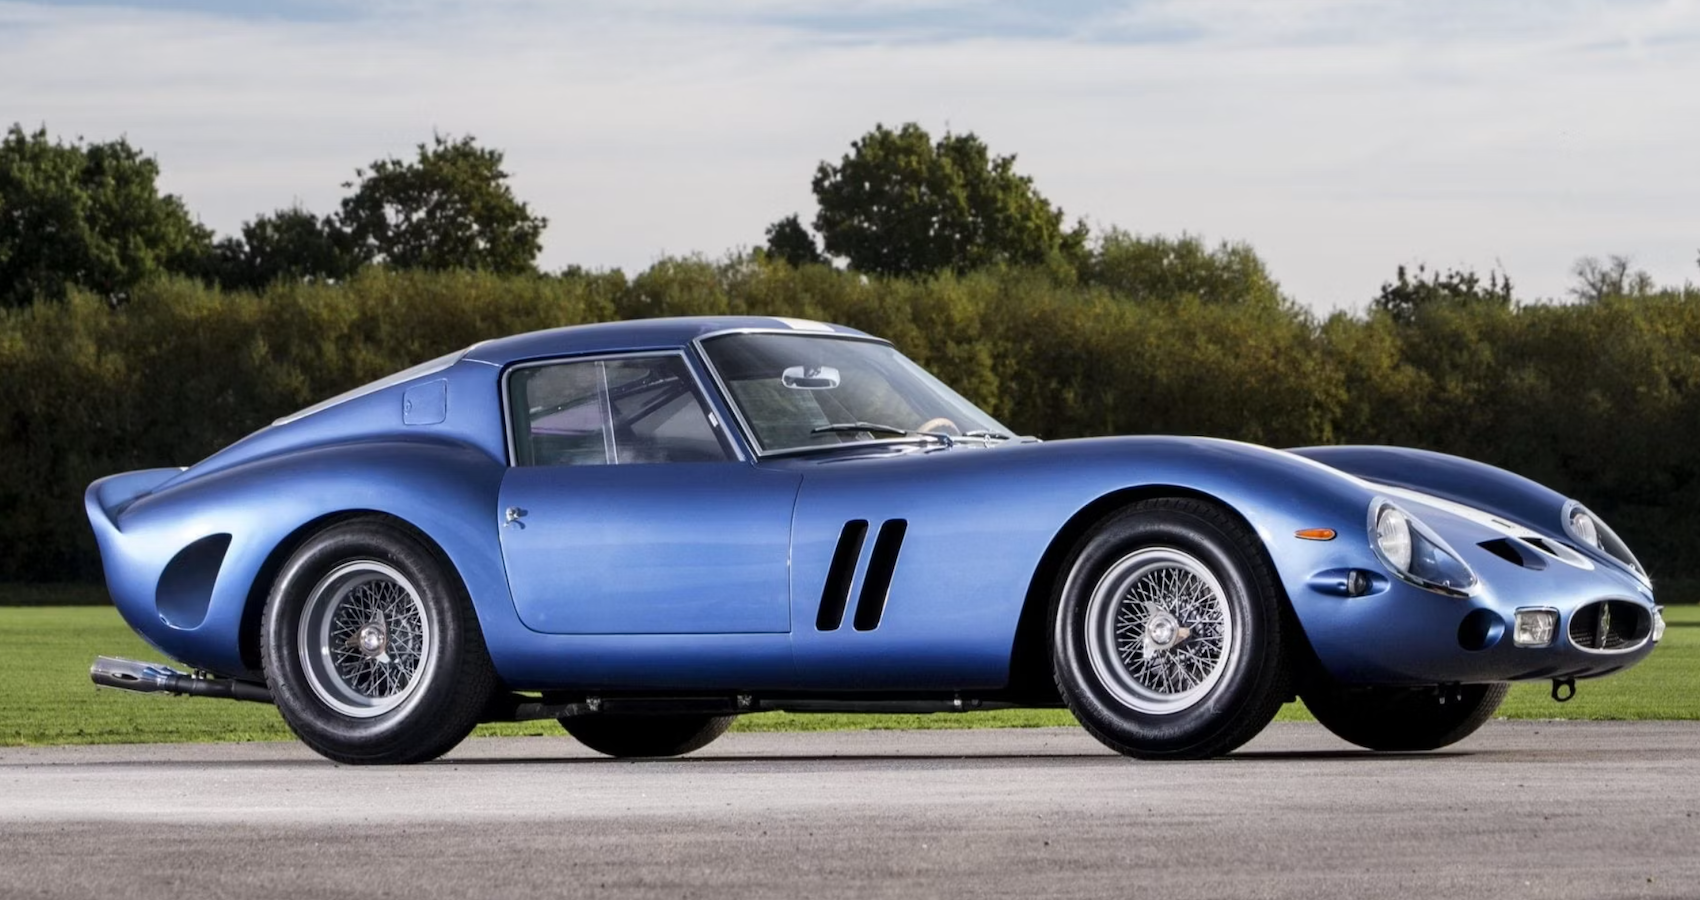 These Are The Most Beautiful Italian Classic Cars You Can Buy